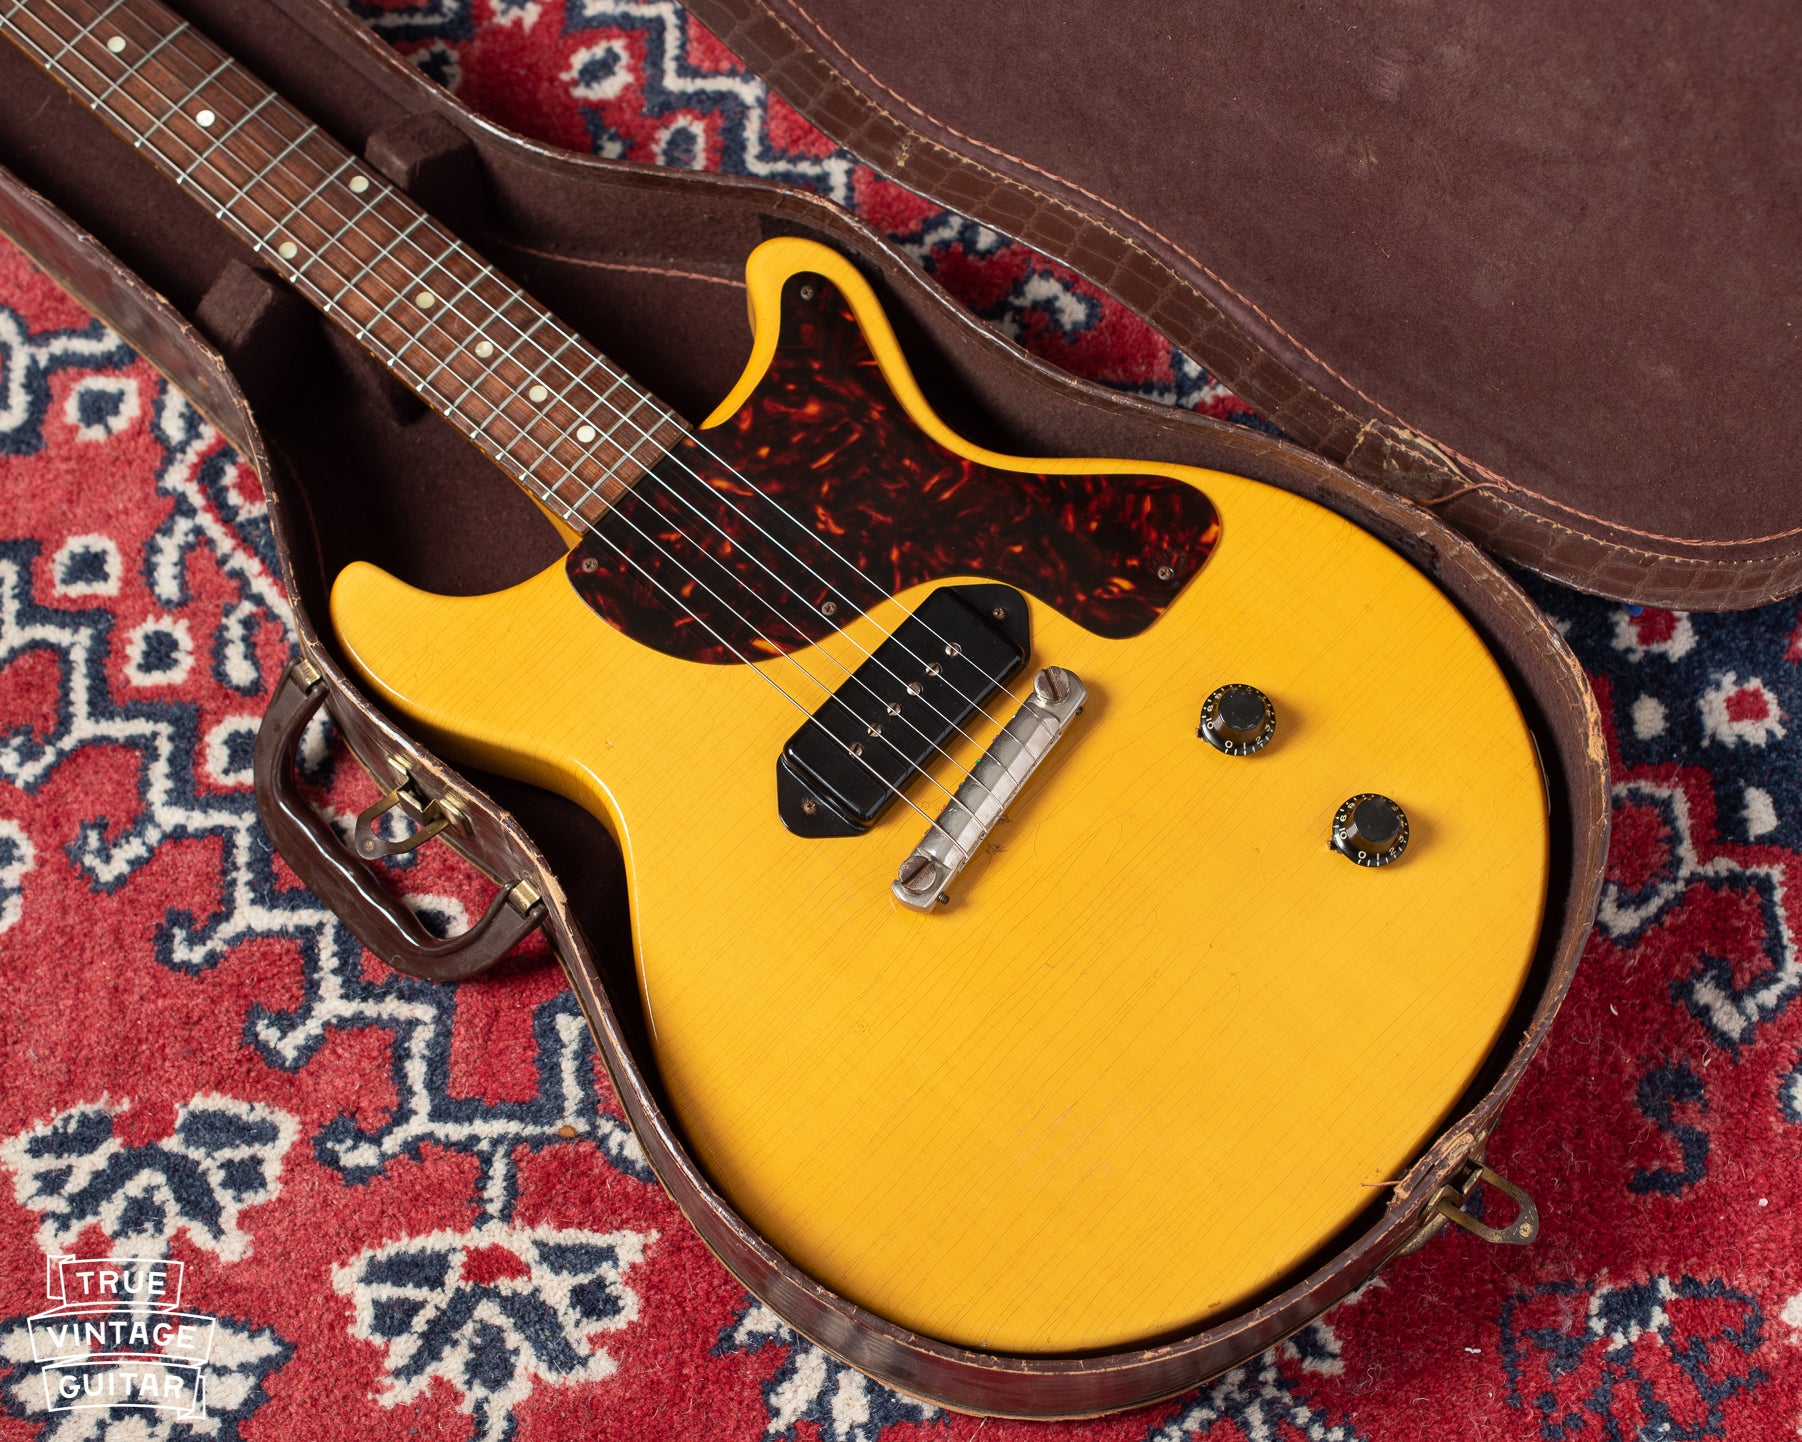 Gibson Les Paul TV junior model electric guitar with TV Yellow finish and tortoise shell pickguard in original case